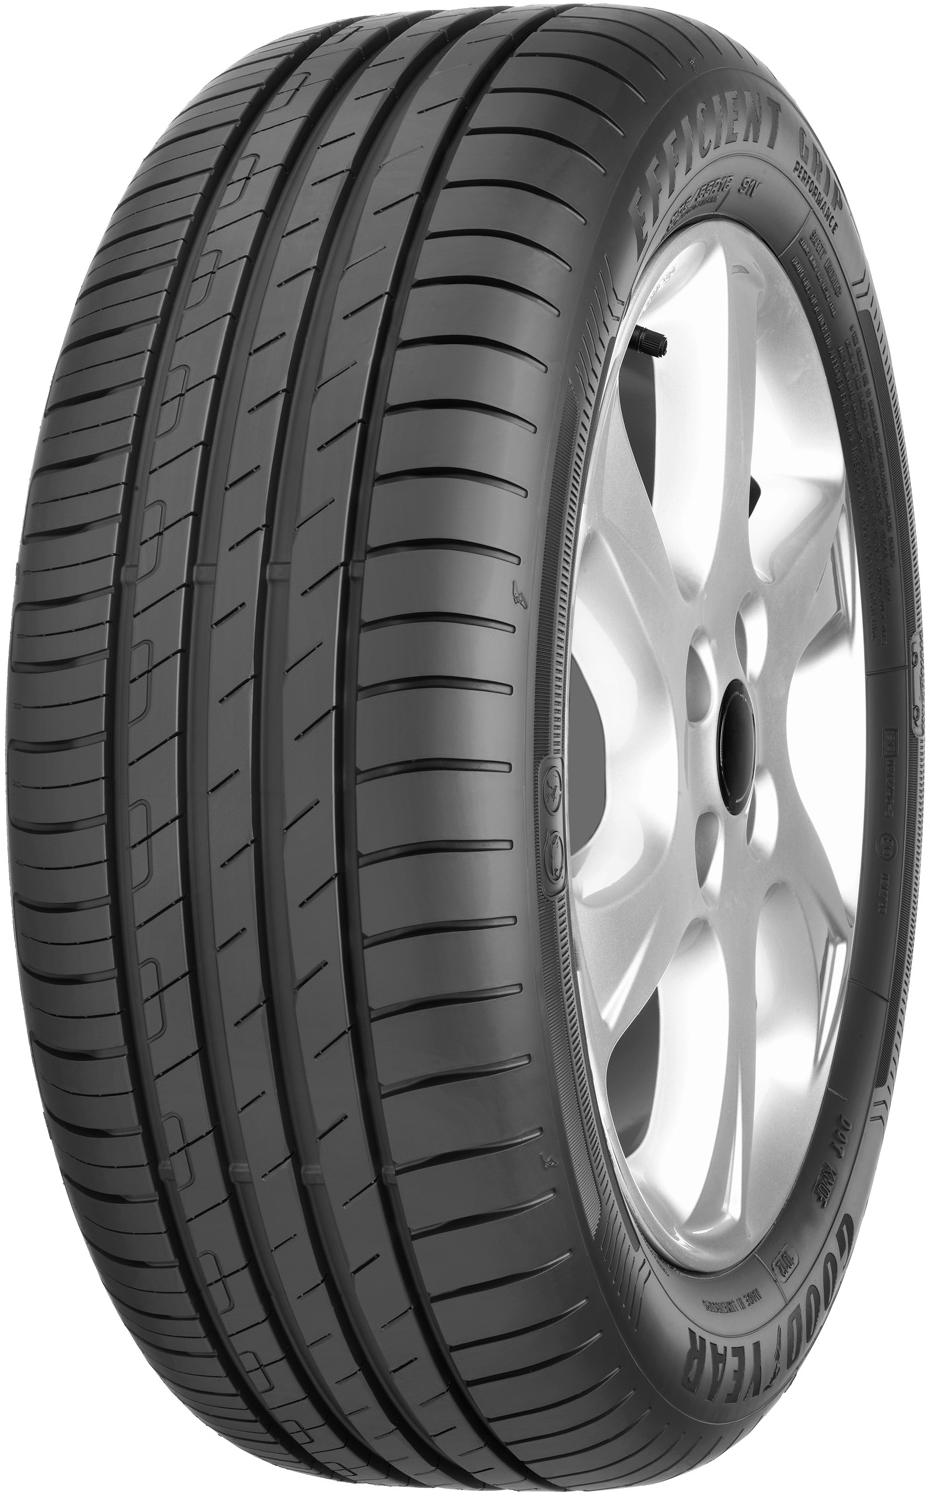 Anvelope auto GOODYEAR EFFIPERFRO RFT BMW FP 205/55 R17 91W